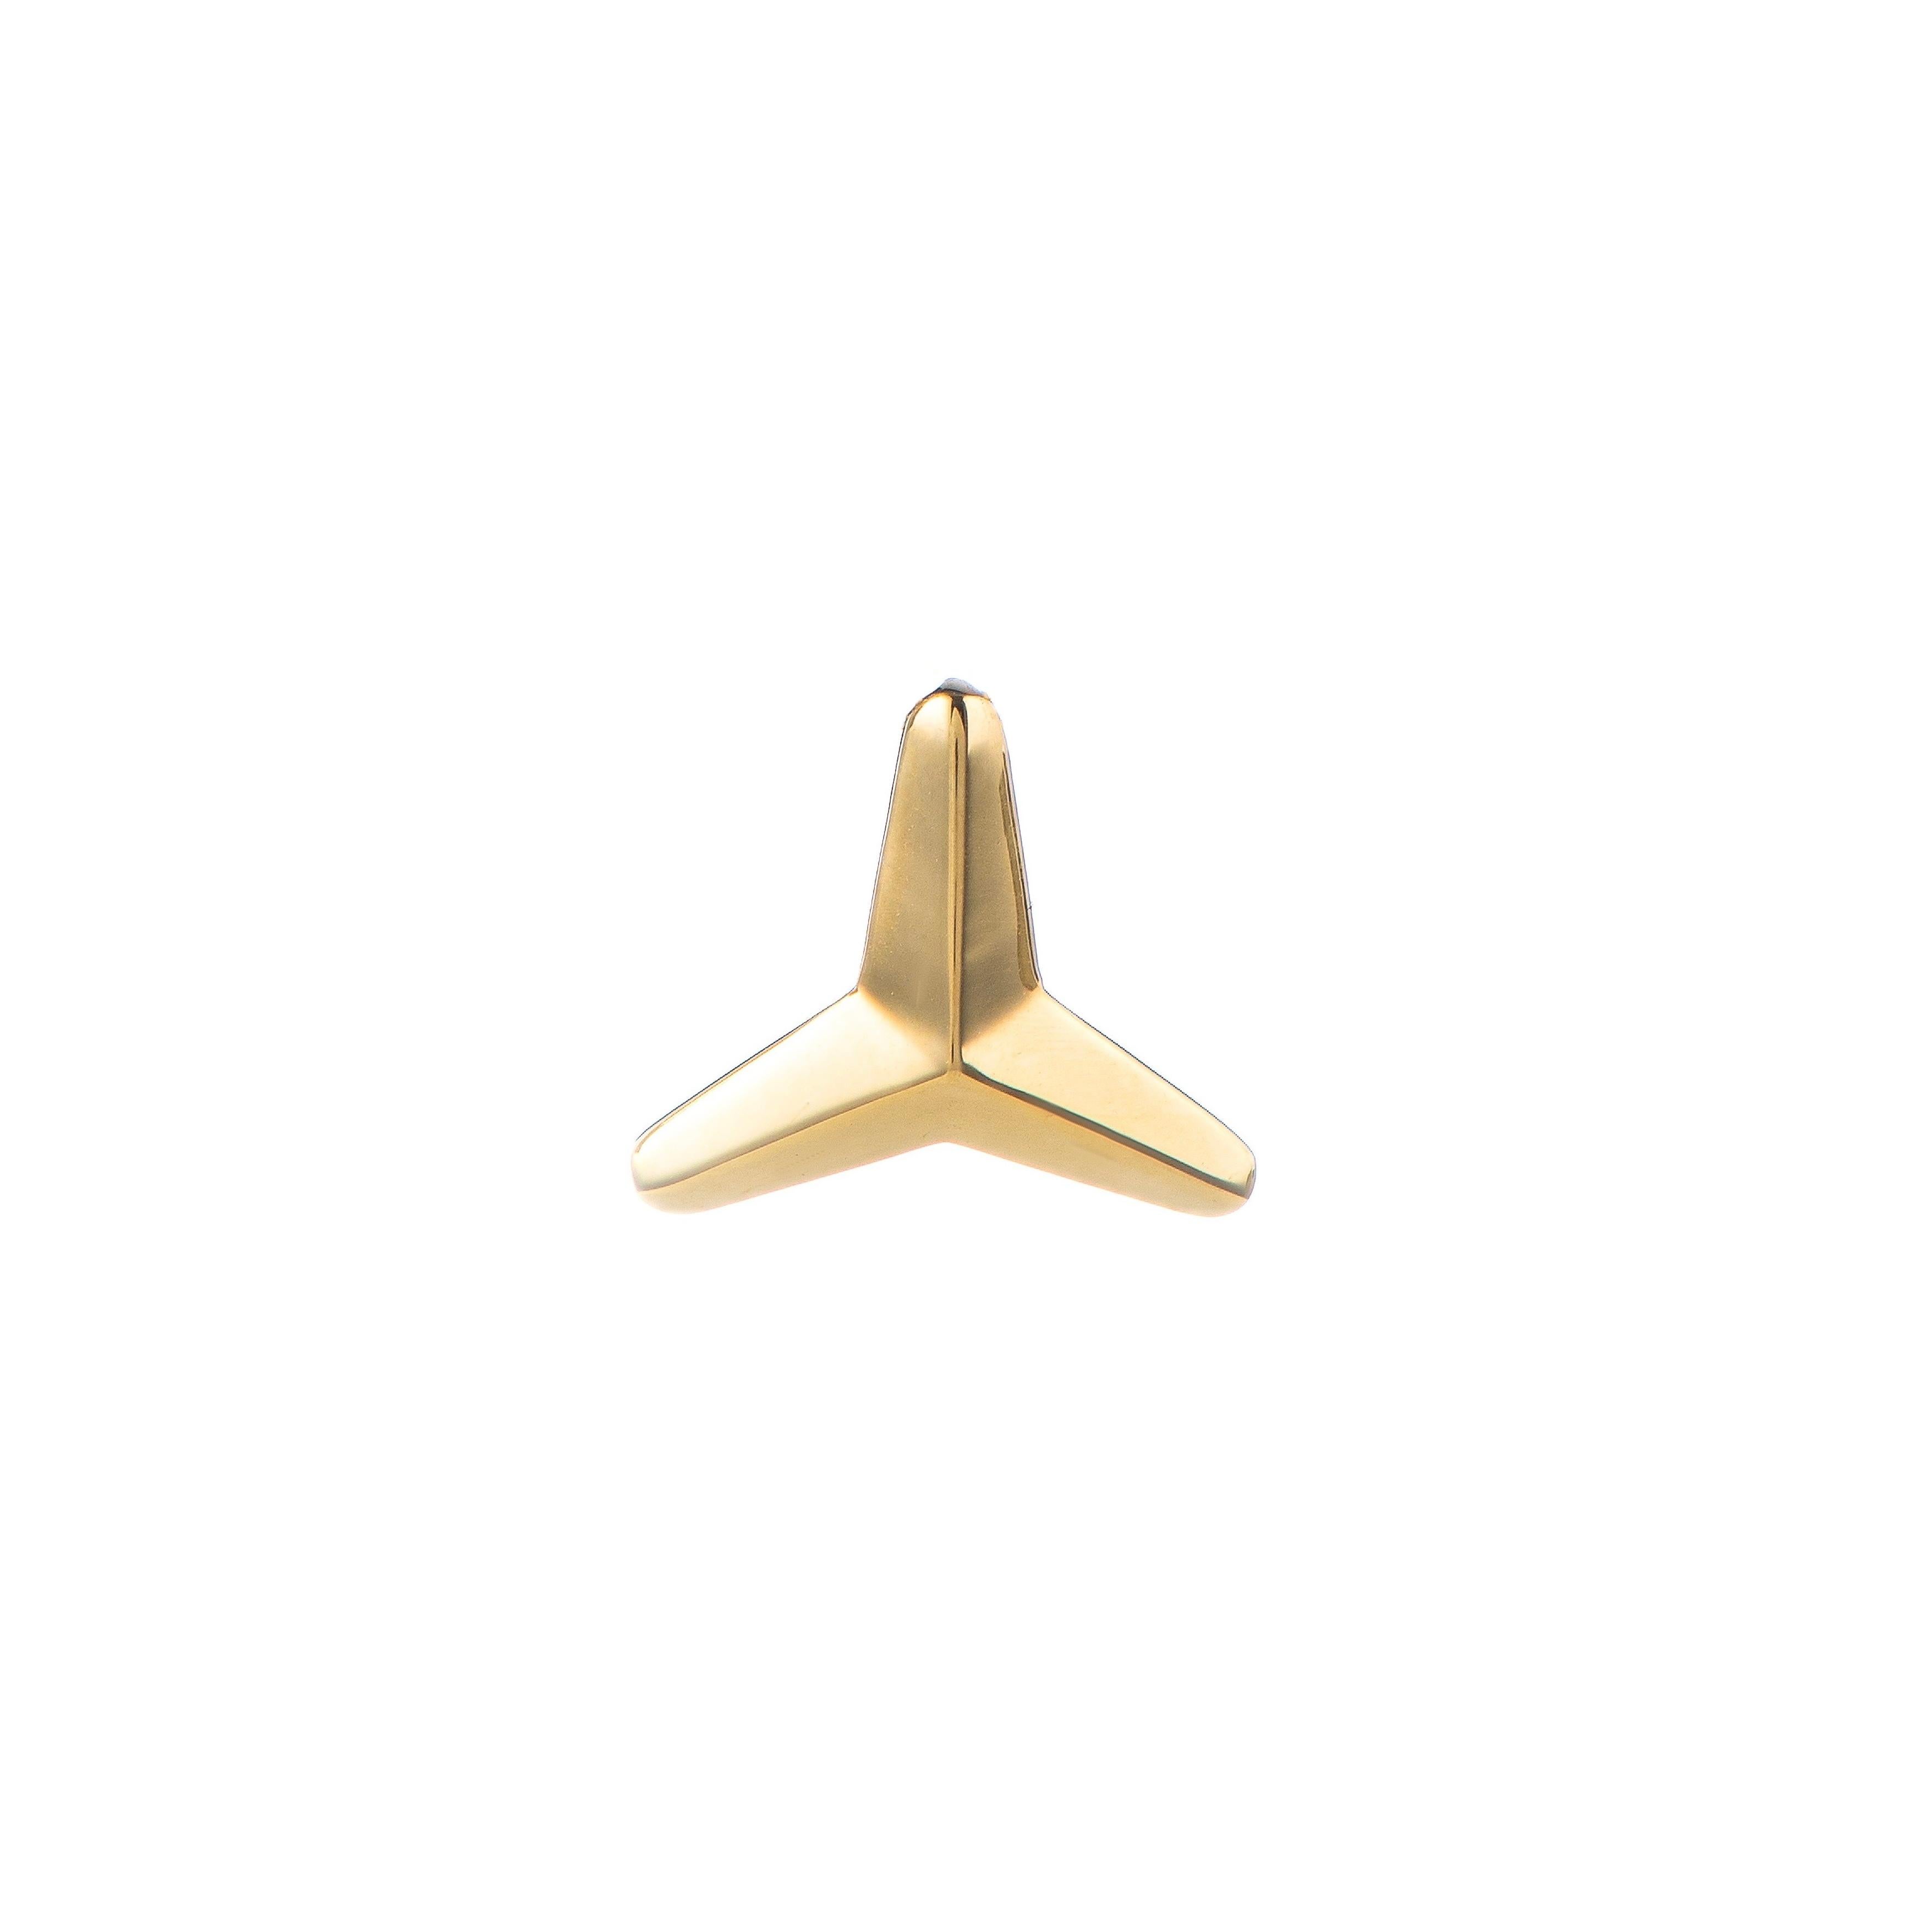 The Three pointed star, pendant necklace is crafted in 18K yellow gold hallmarked in Cyprus. This sculptural pendant necklace comes in a highly polished finish with a pierced back and may easily become the perfect everyday statement piece that you